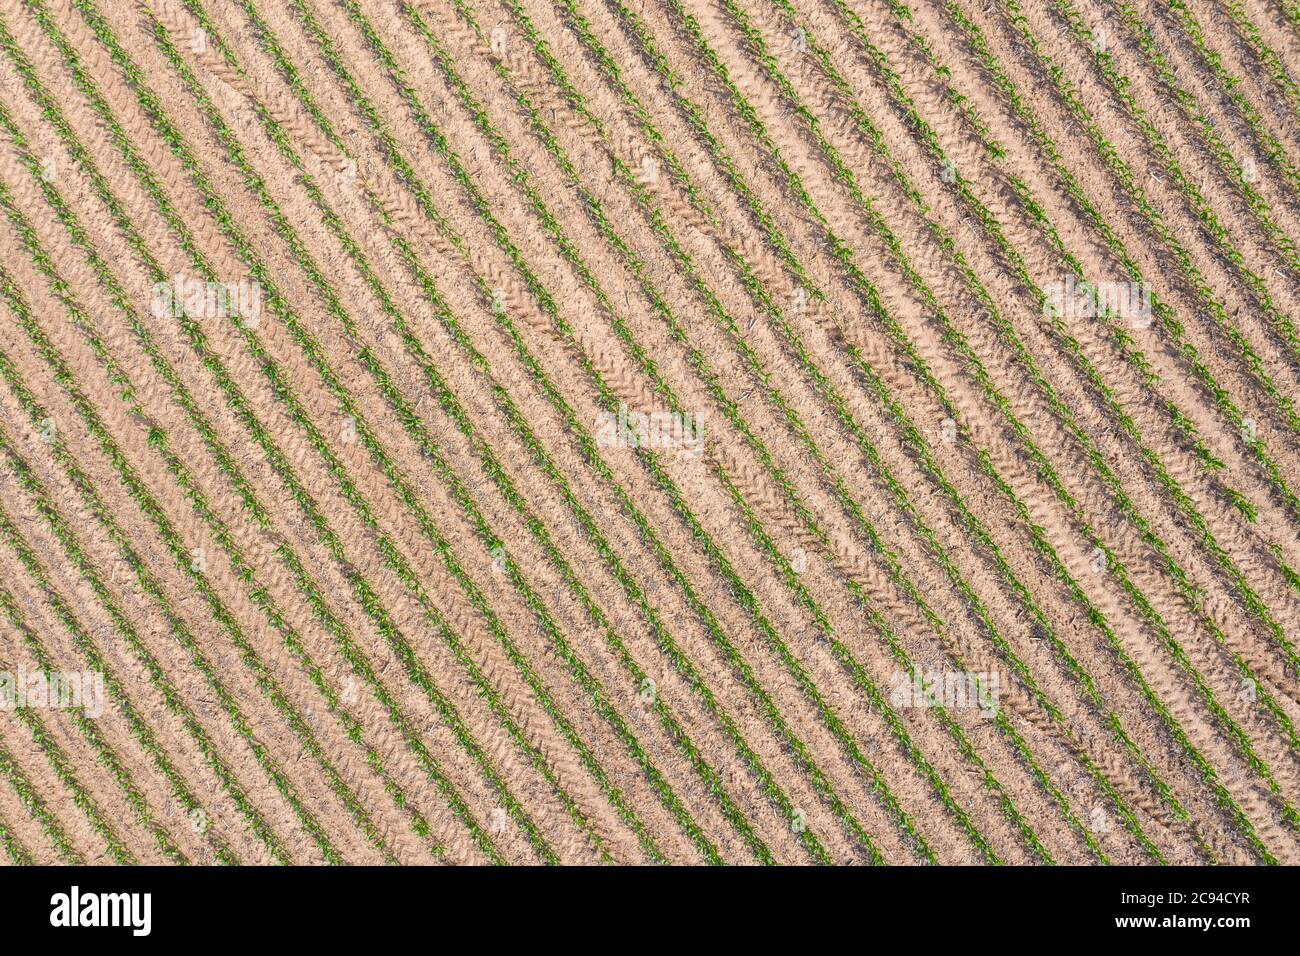 A drone image overlooking a newly growing crop of corn shows a classic farmland scene typical of the Midwest. Stock Photo